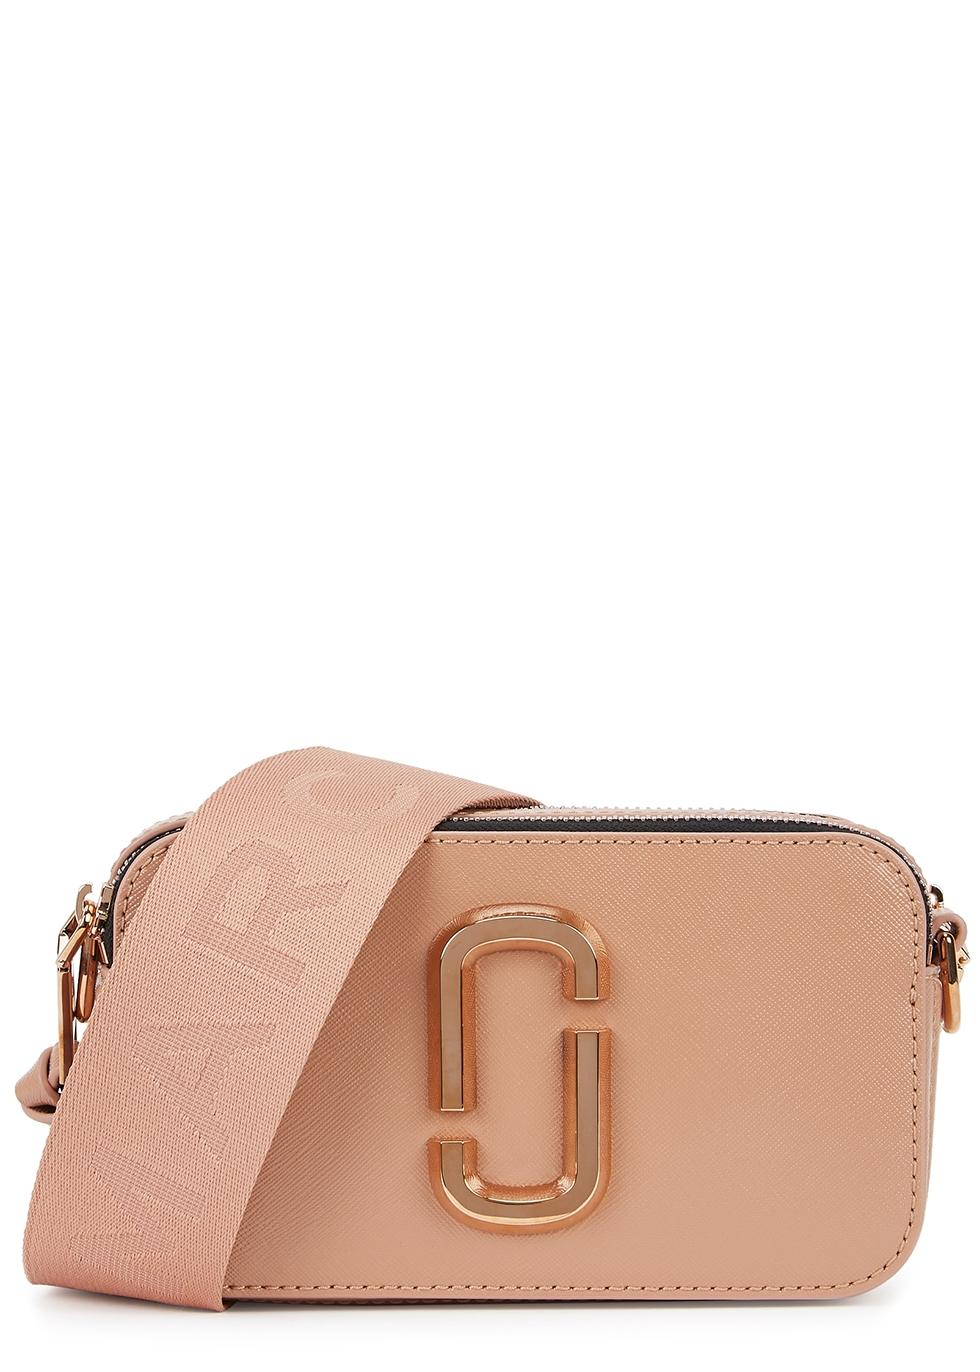 Snapshot leather crossbody bag Marc Jacobs Pink in Leather - 21936520